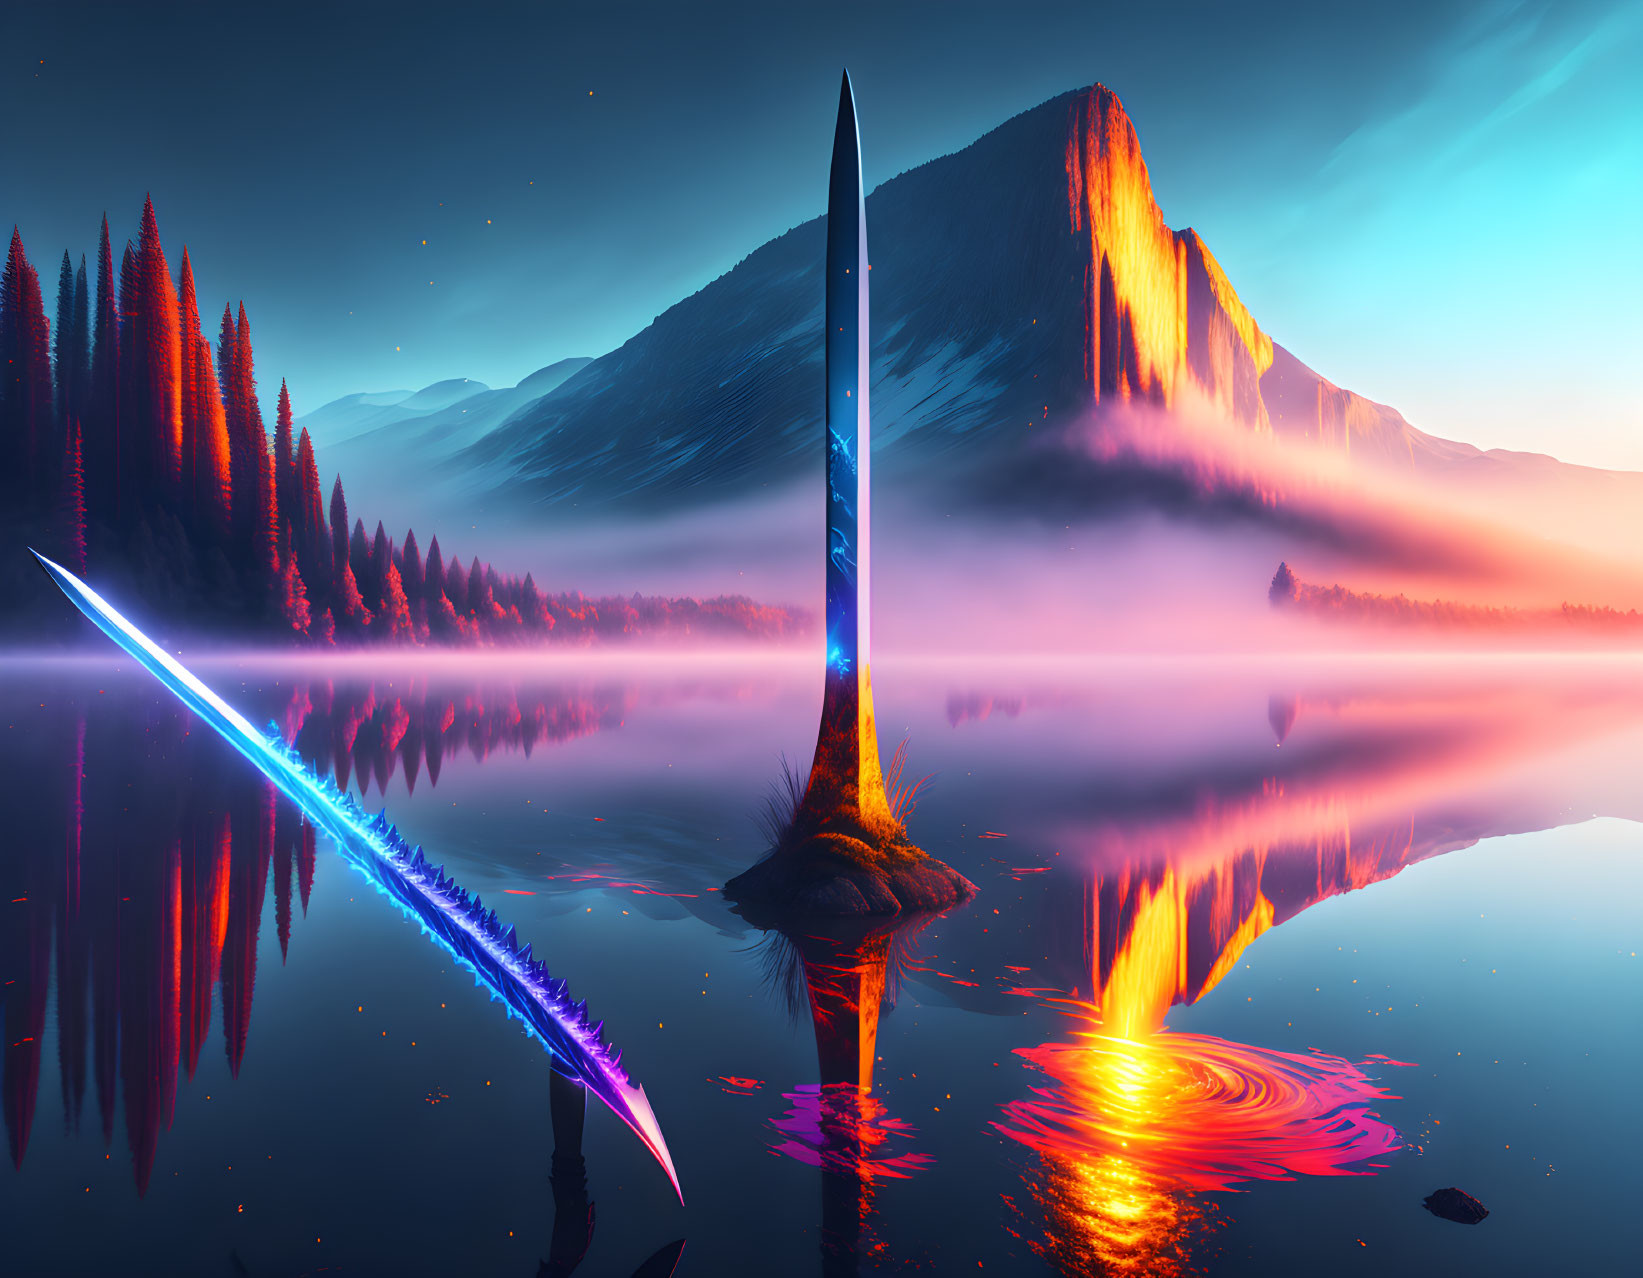 Surreal landscape with reflective lake, towering spire, sunset colors, mist, mountains, star